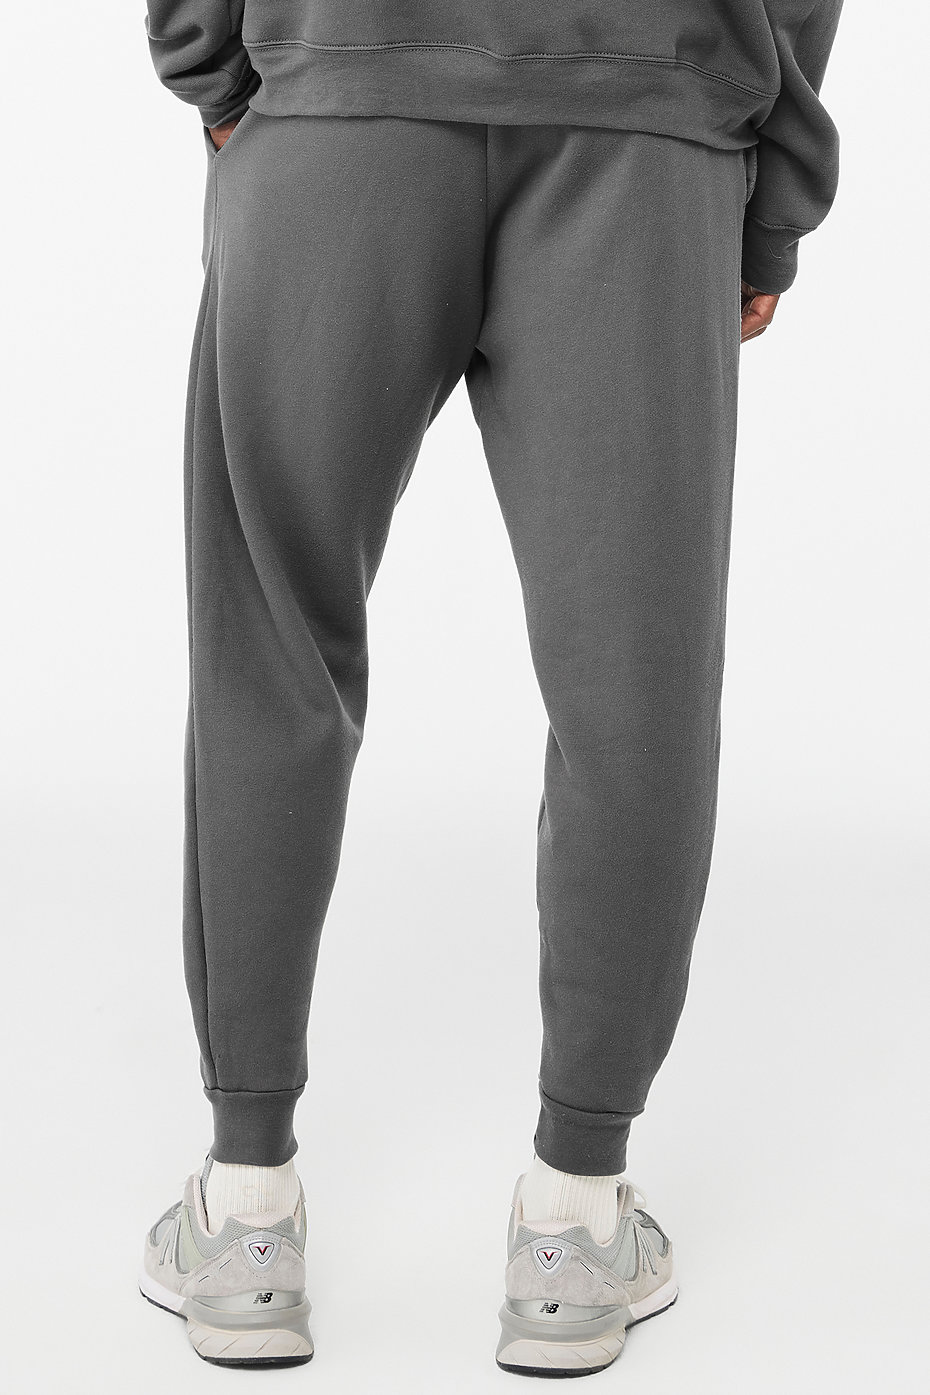 The Roebling Pleated Trousers in Italian Fabric